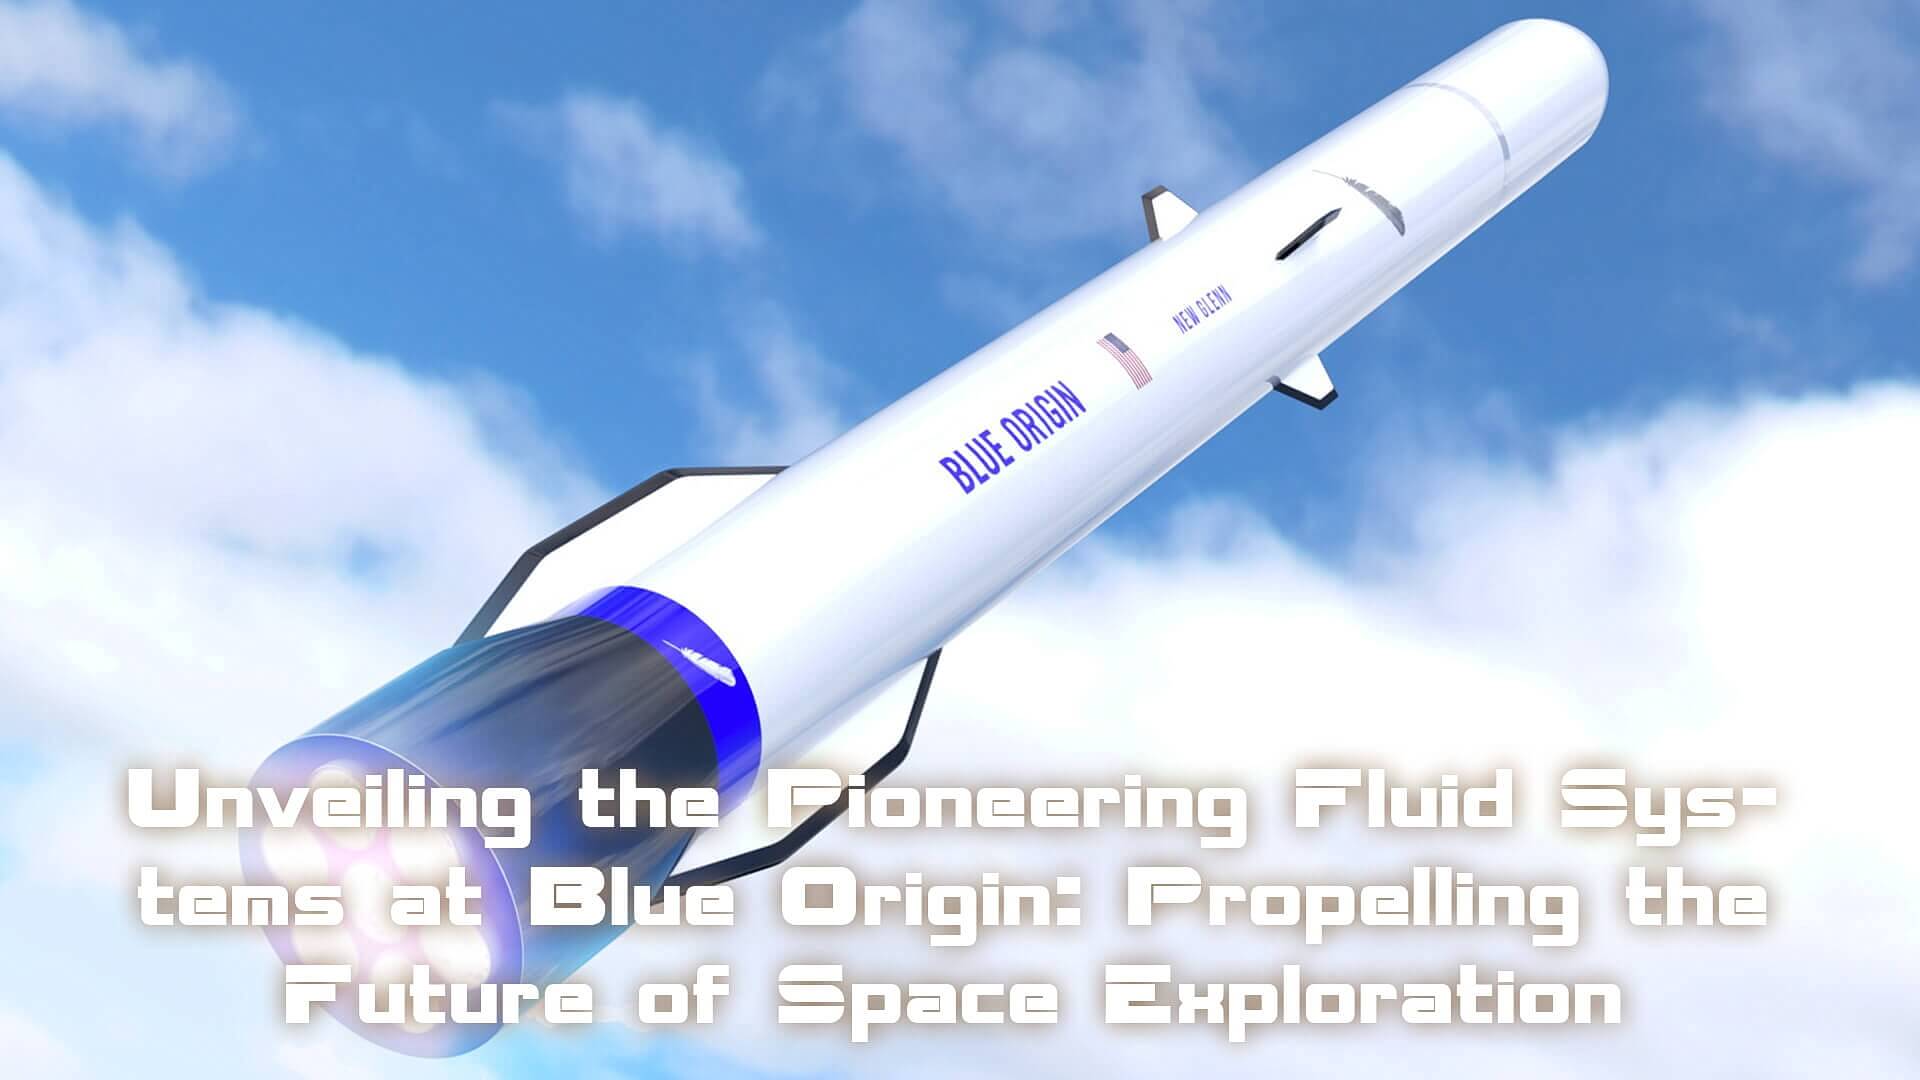 Unveiling the Pioneering Fluid Systems at Blue Origin